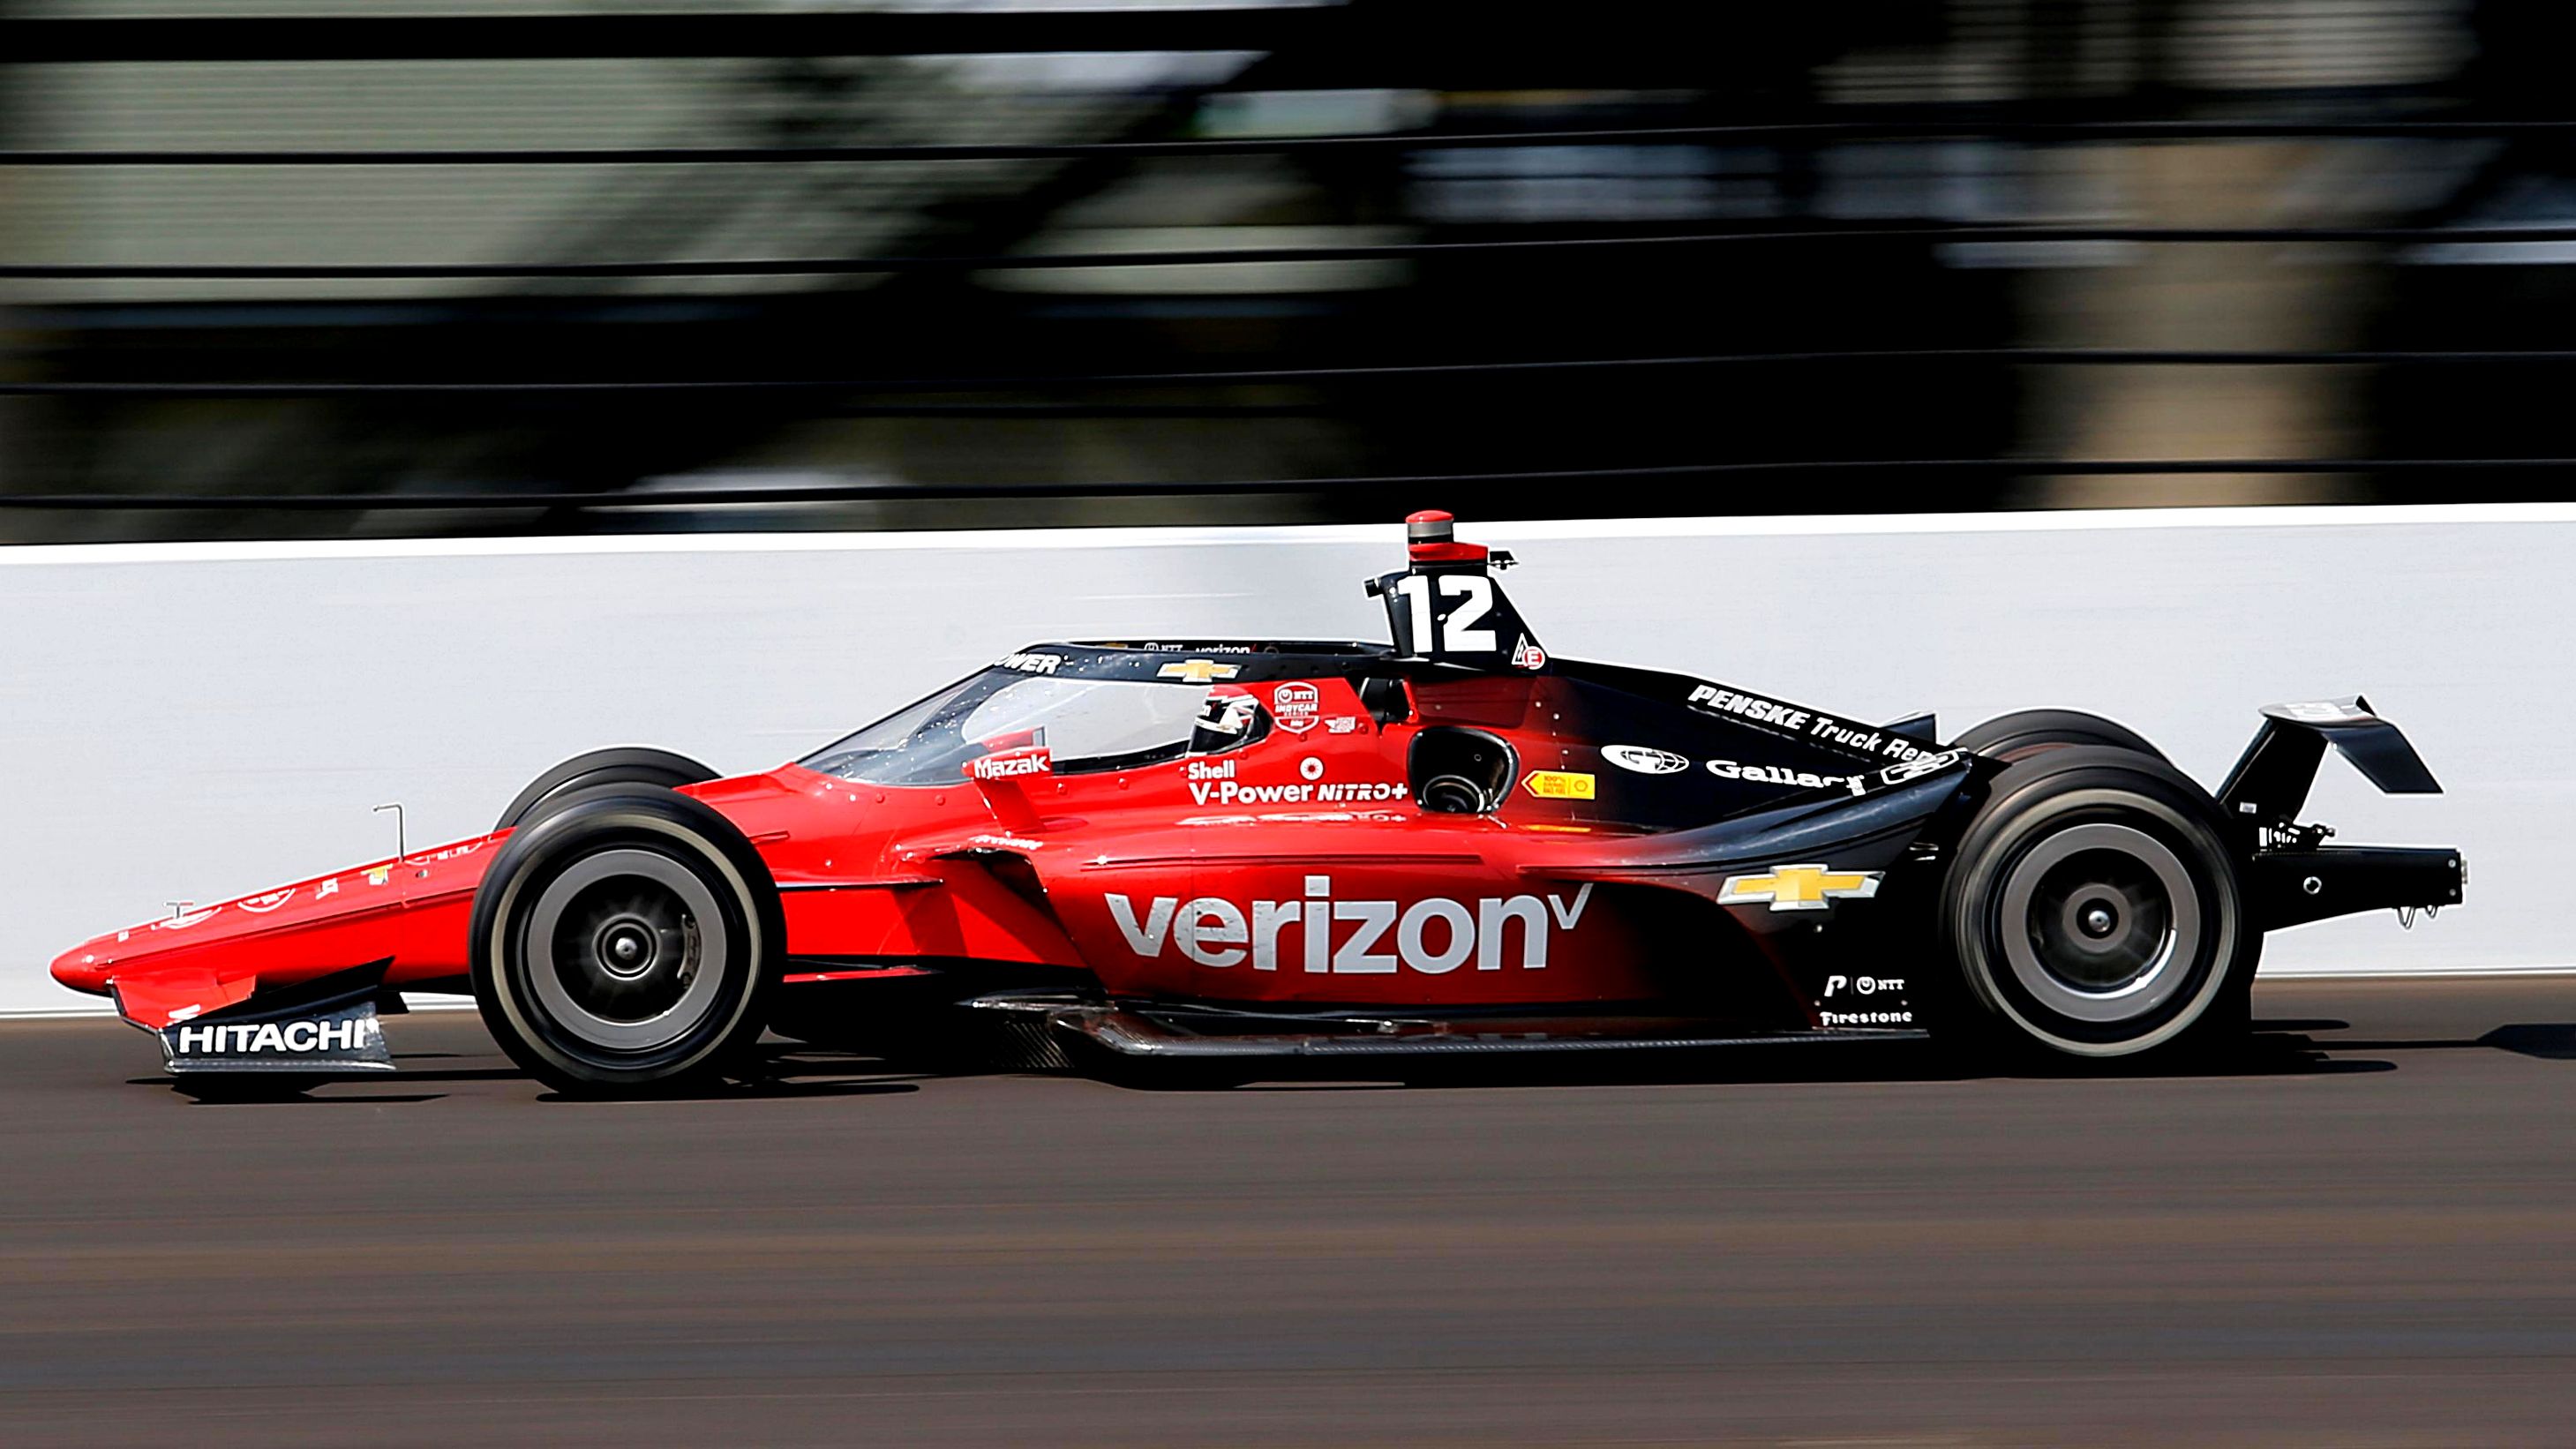 Will Power will start the 107th Indianapolis 500 from 12th.